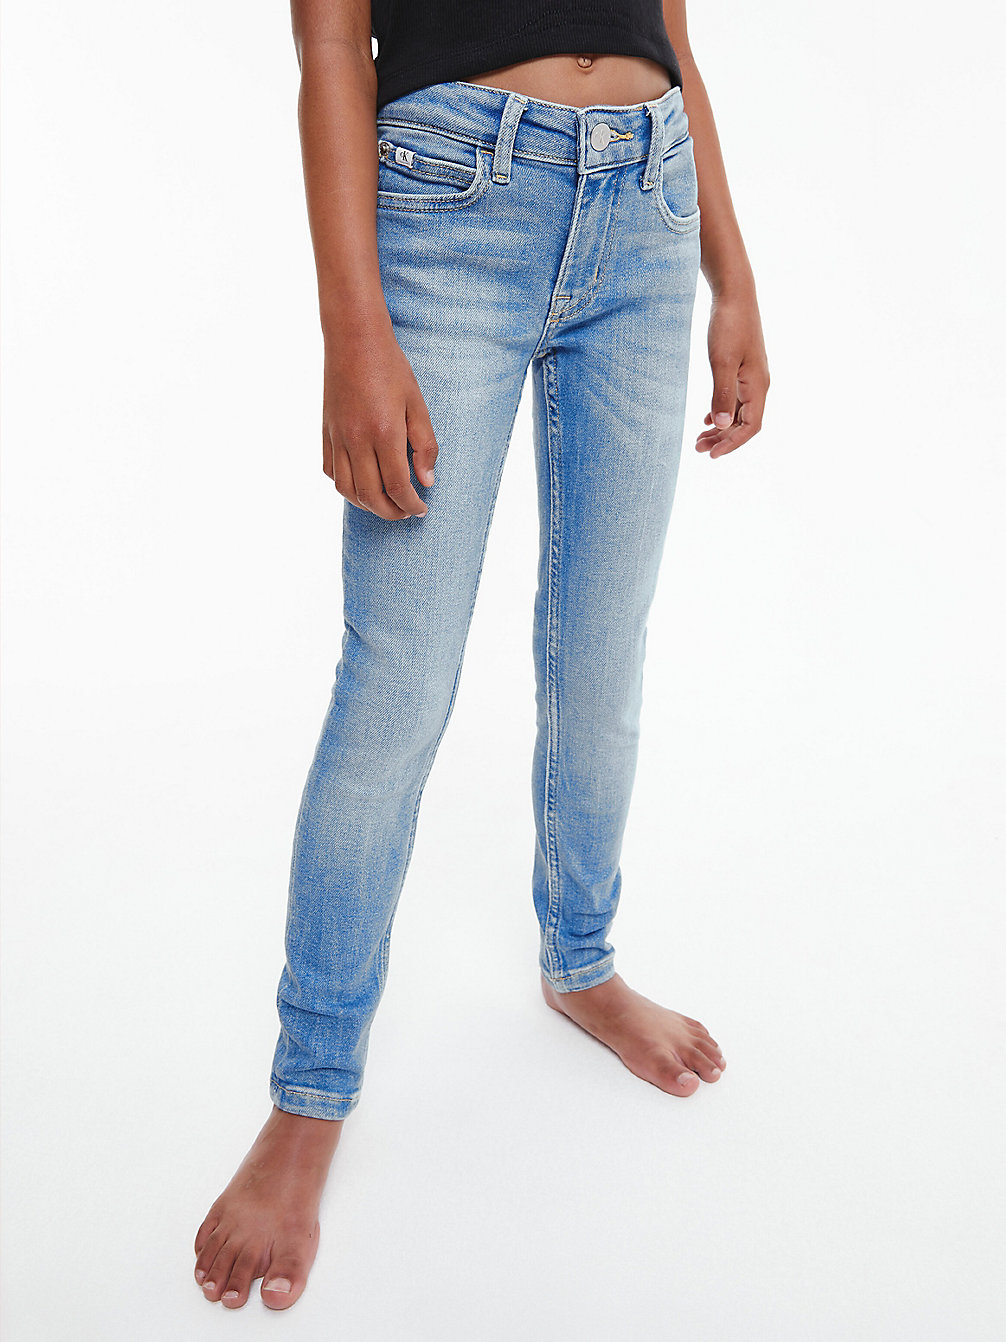 MID BLUE Jean Skinny Mid Rise undefined girls Calvin Klein